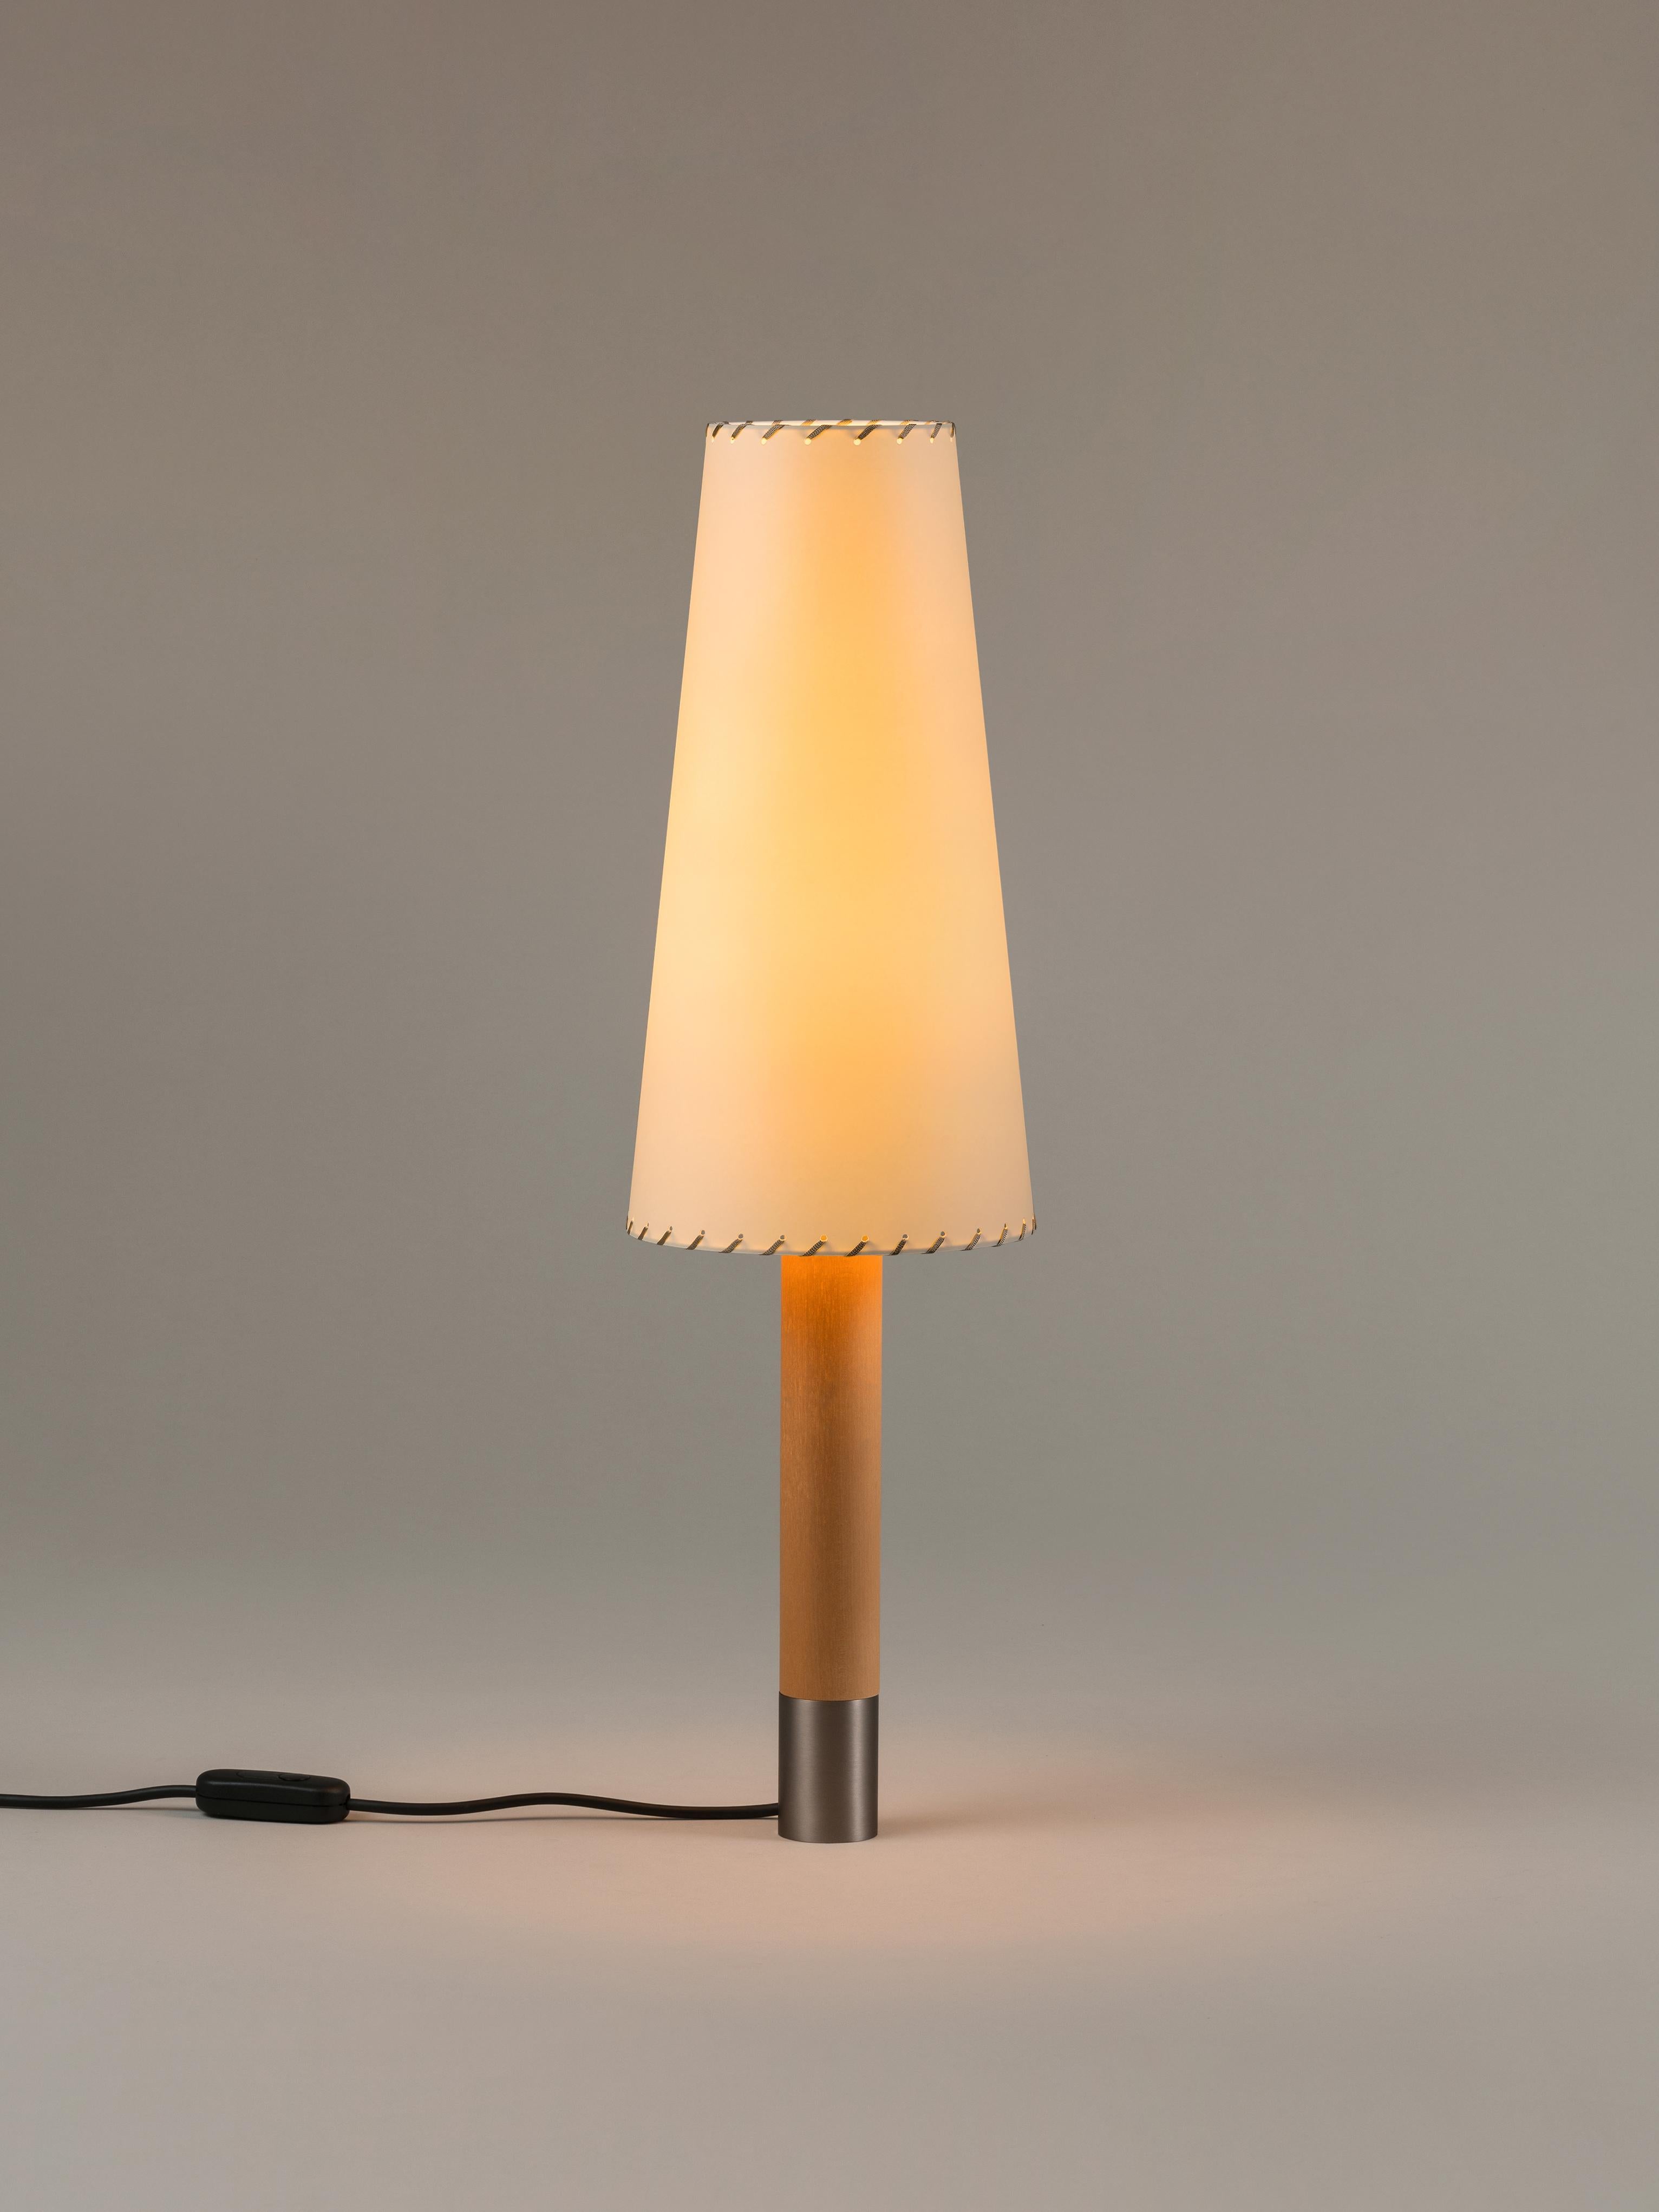 Nickel Básica M2 table lamp by Santiago Roqueta, Santa & Cole
Dimensions: d 20 x h 71 cm
Materials: Nickel, birch wood, paperboard.
Available in nickel or bronze and with or without the stabilizing disc.

The Básica lamp champions the return to